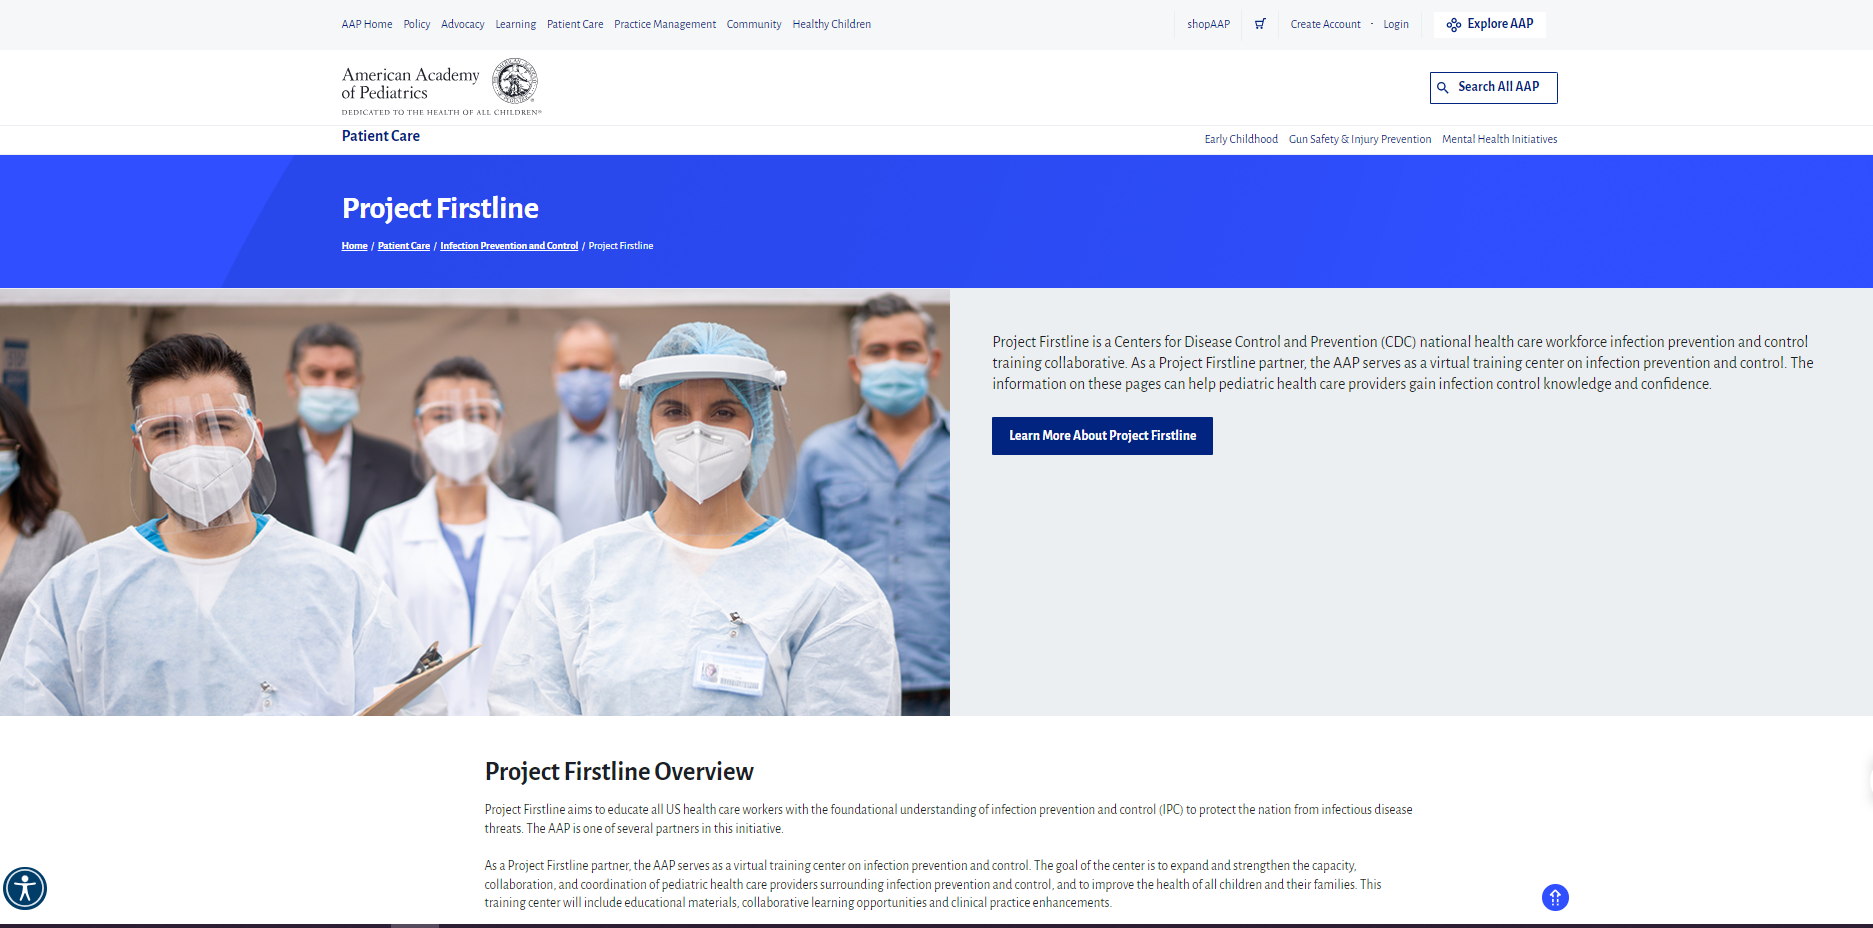 Webpage image shows multiple health care providers wearing various protective equipment such as masks and face shields